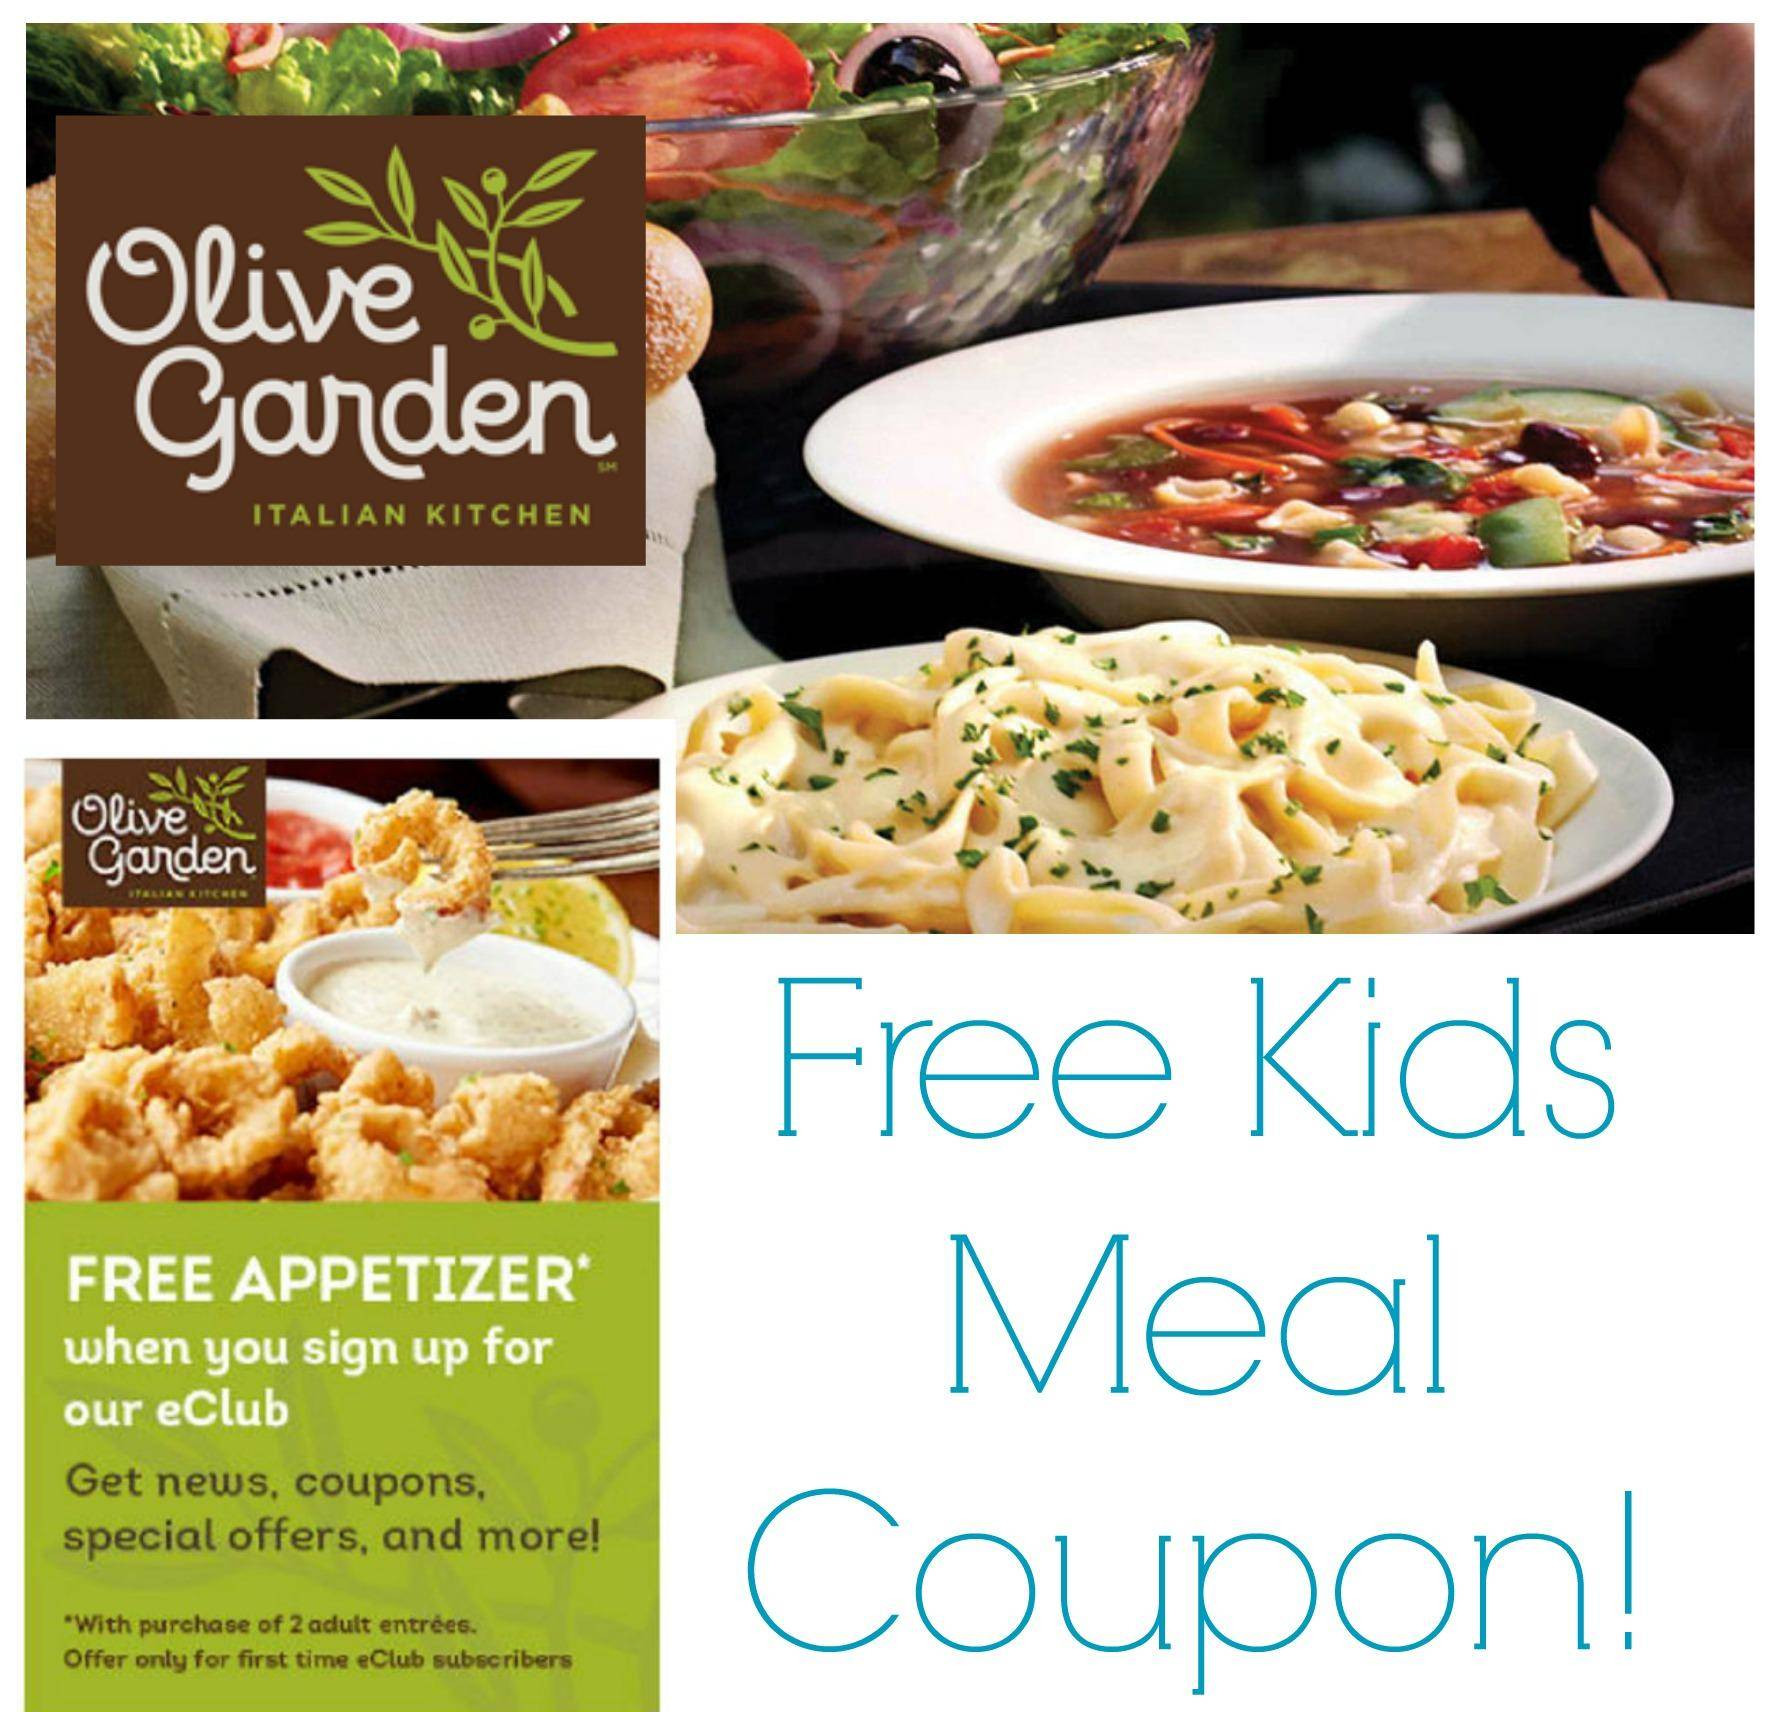 Olive Garden Free Appetizer Coupon
 Olive Garden Coupons